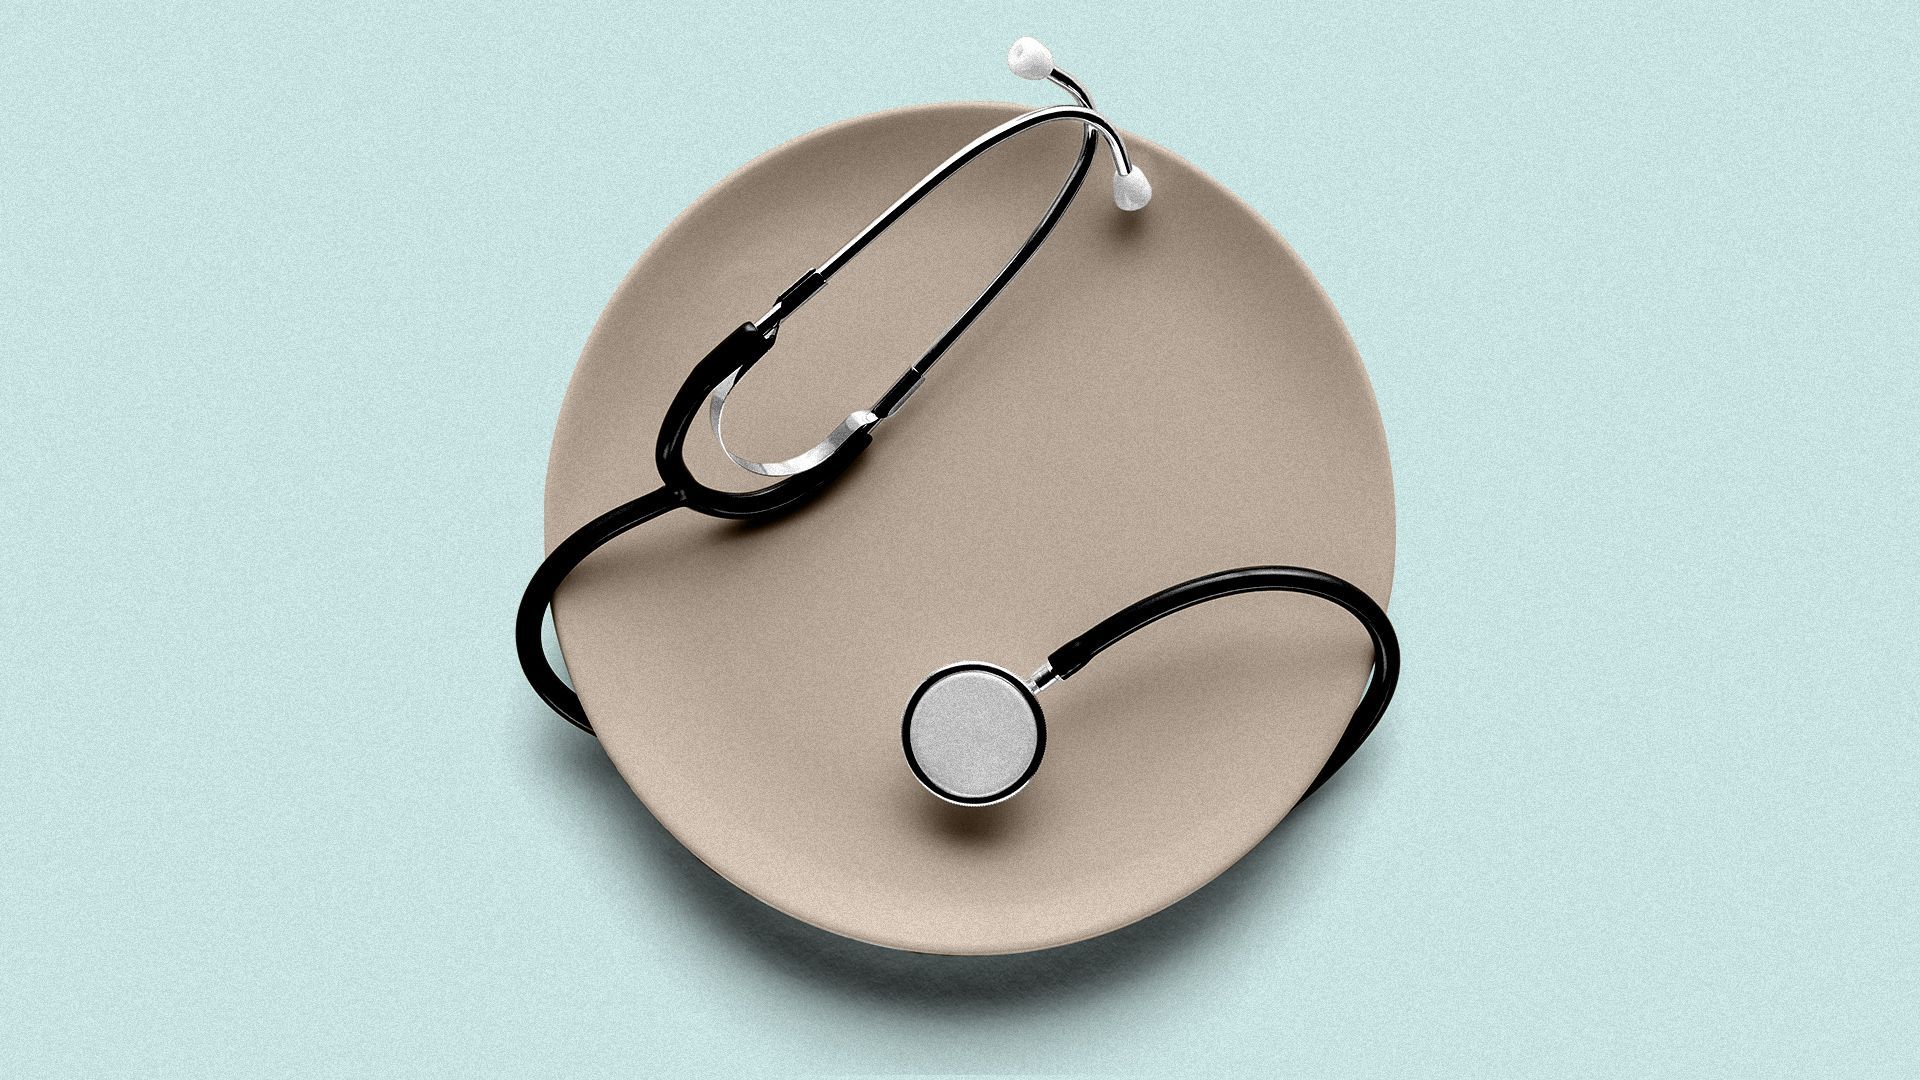 Illustration of an empty plate with a stethoscope wrapped around it. 